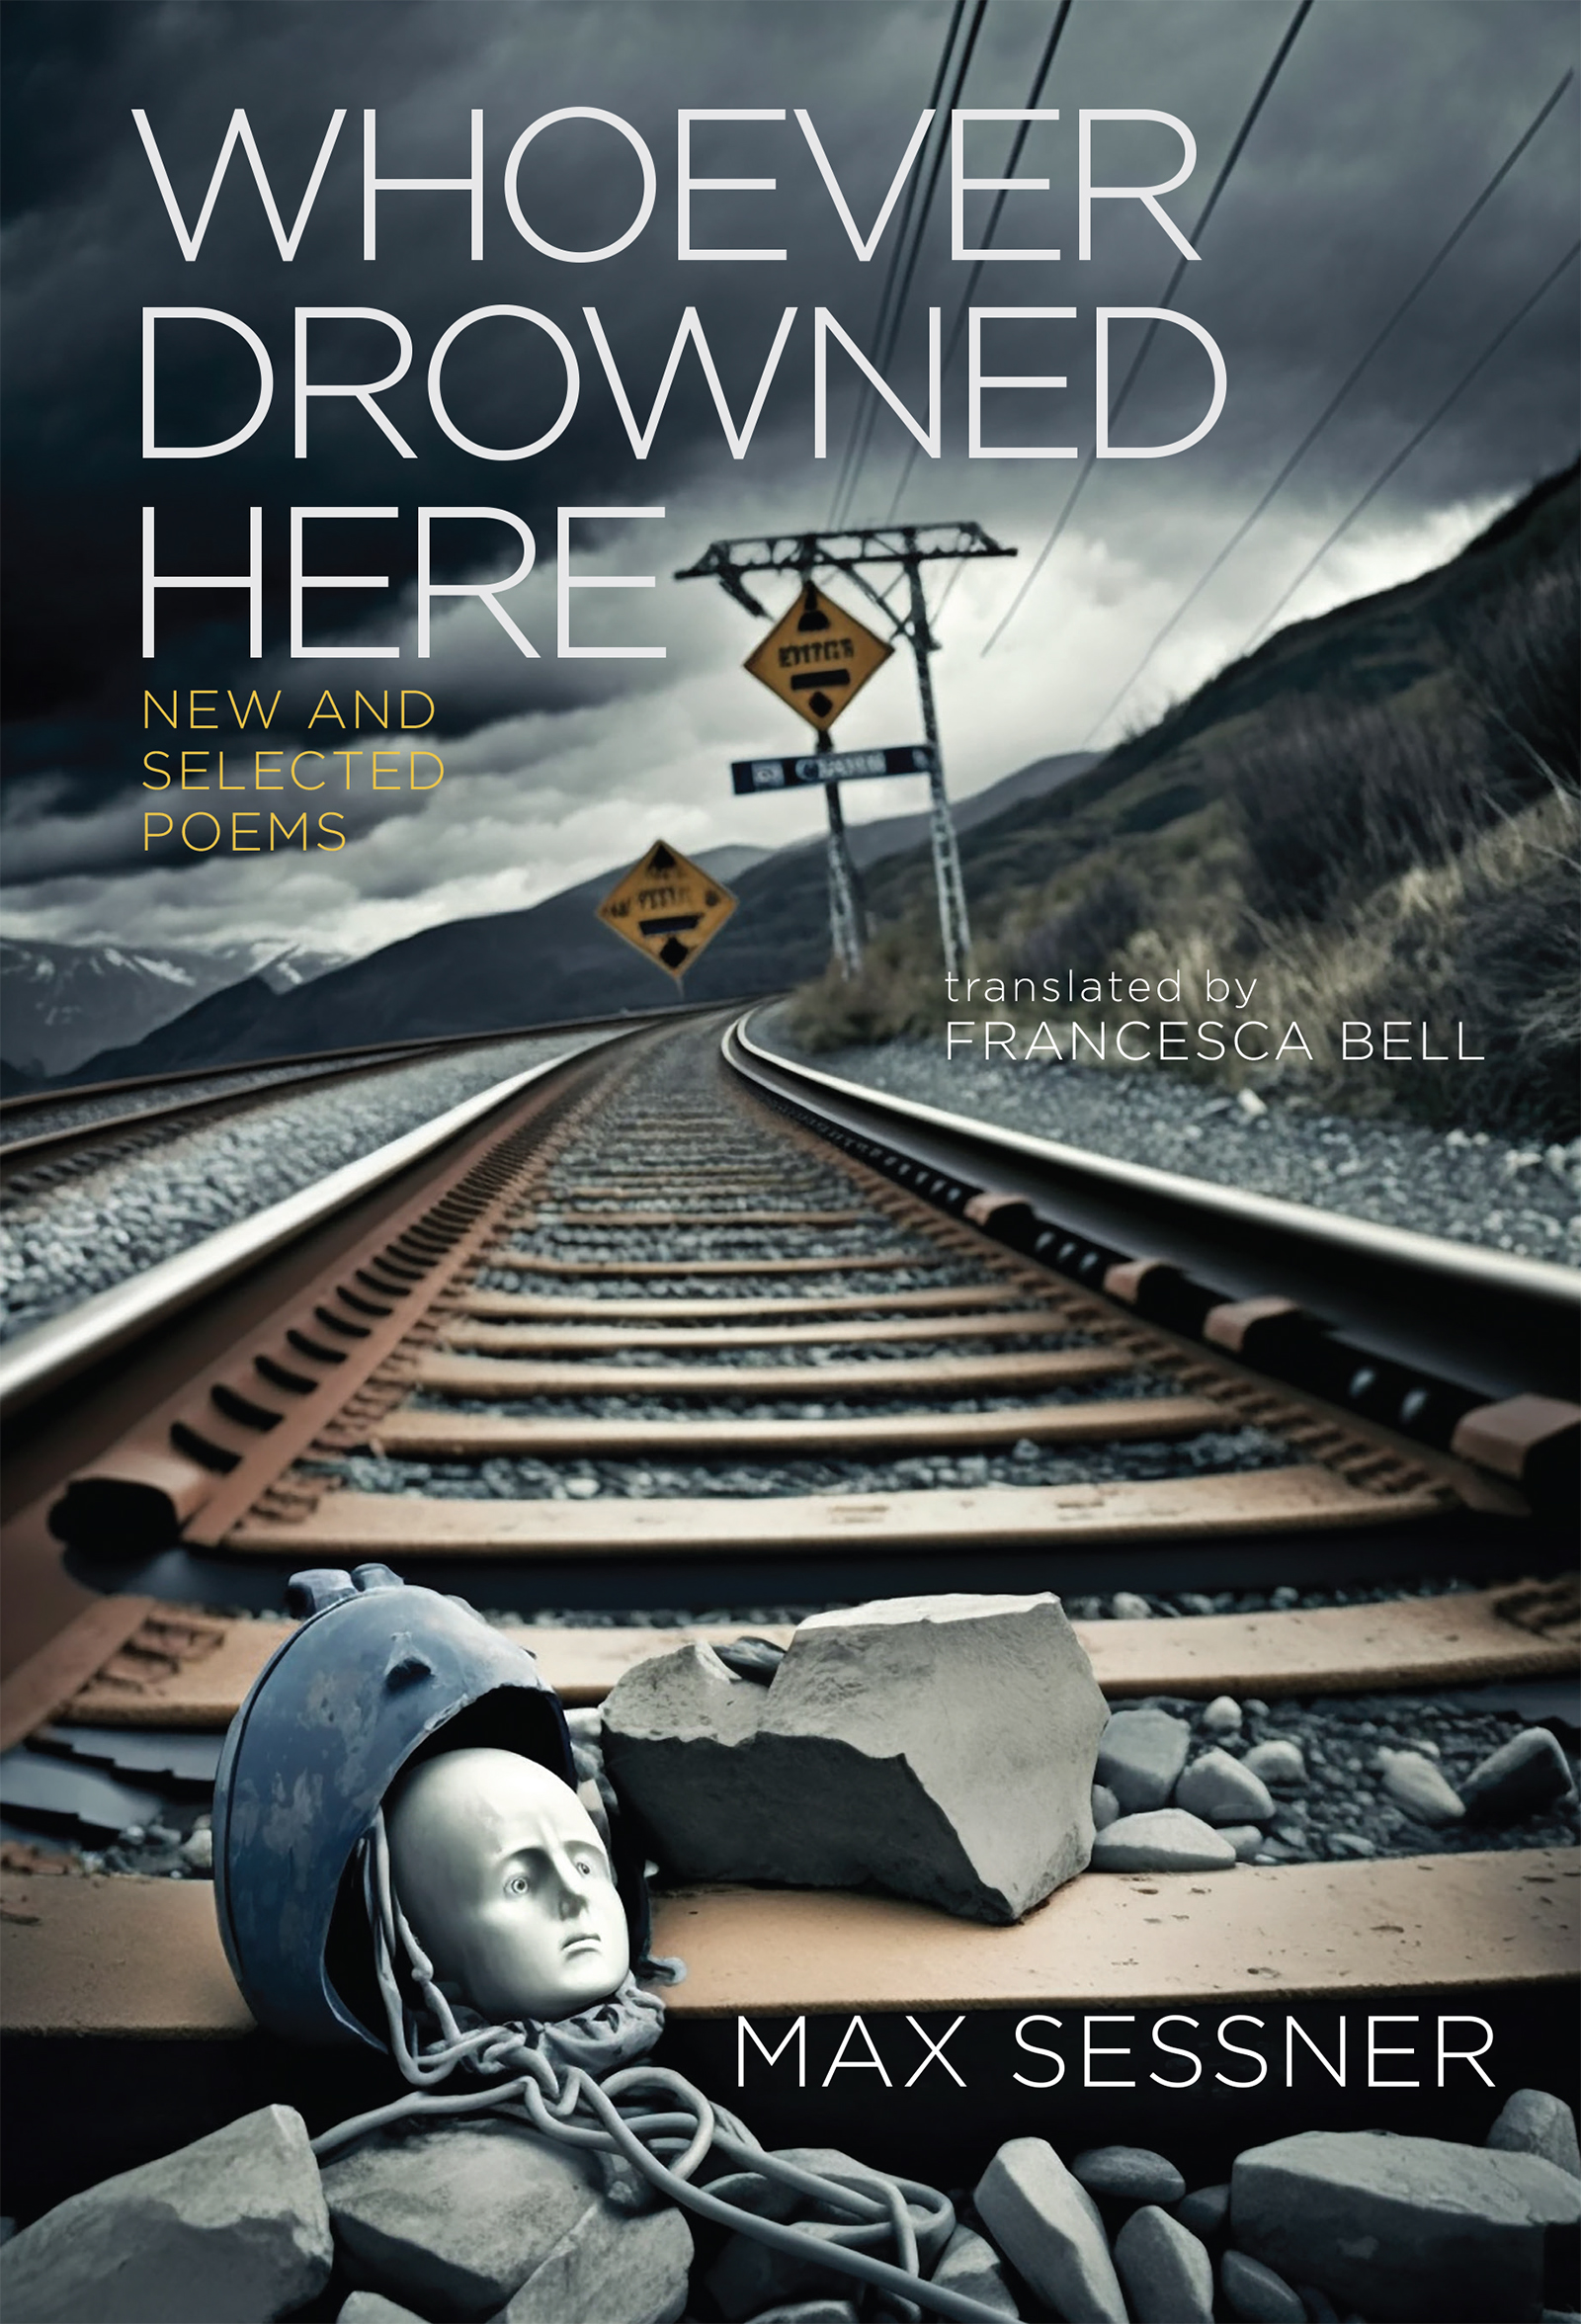 A mannequin head in a medieval helmetl in chains lies on a railroad track in the mountains. In the sky, is the title: "Whoever Drowned Here: Max Sessner, Translated by Francesca Bell